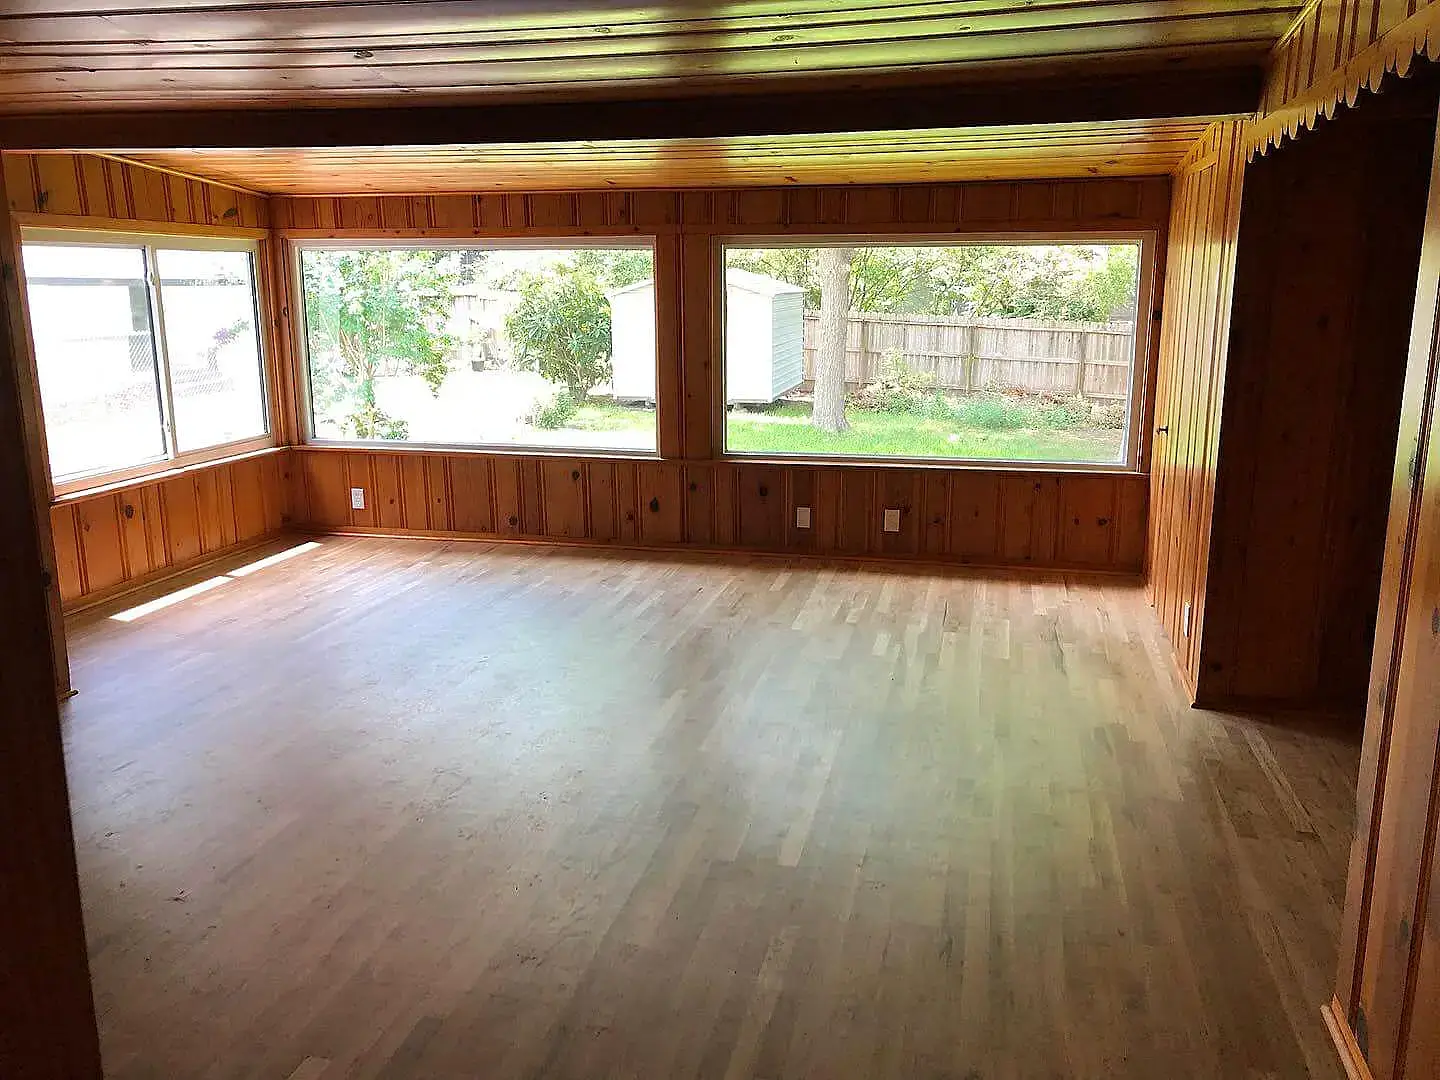 Large windows installed in a sunroom with wooden walls and light flooring in Corpus Christi.